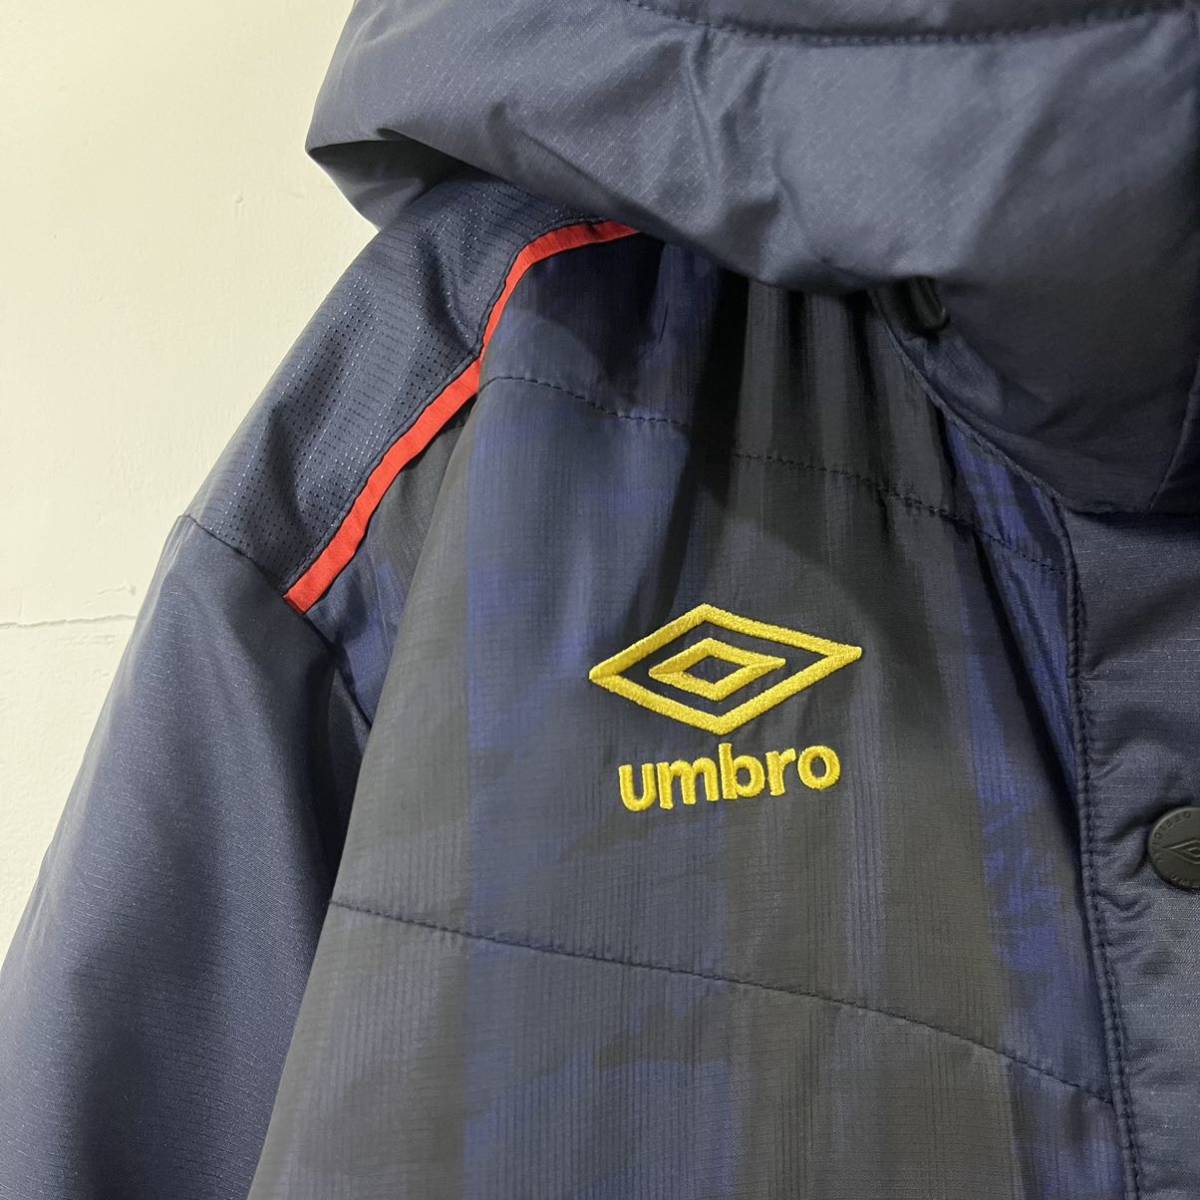 UMBRO bench coat long coat total pattern embroidery Logo one Point back print hood demountable talent sport Umbro [ uniform carriage / including in a package possibility ]K